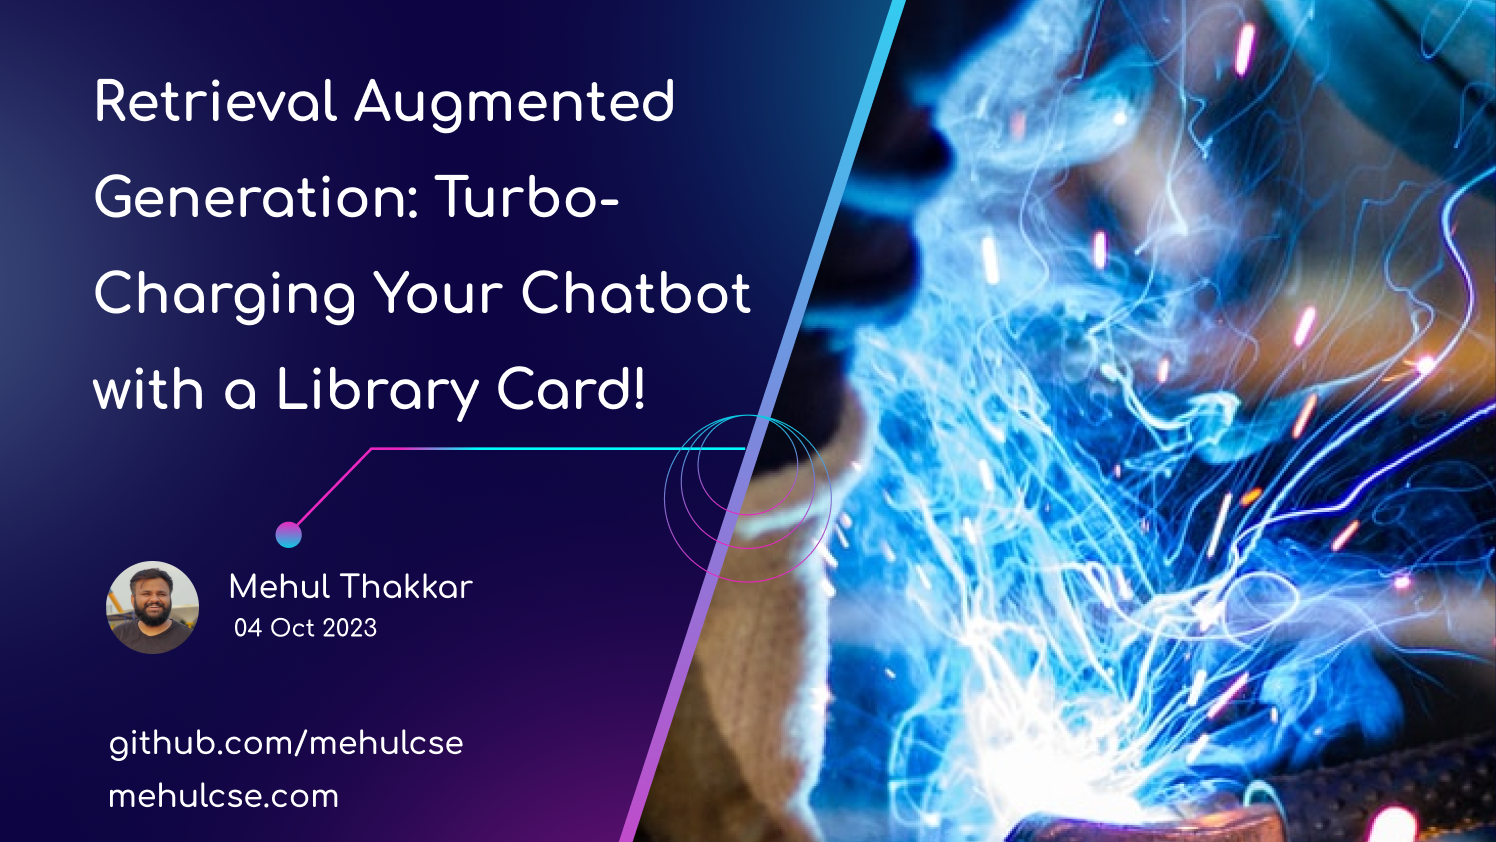 Retrieval Augmented Generation: Turbo-Charging Your Chatbot with a Library Card!